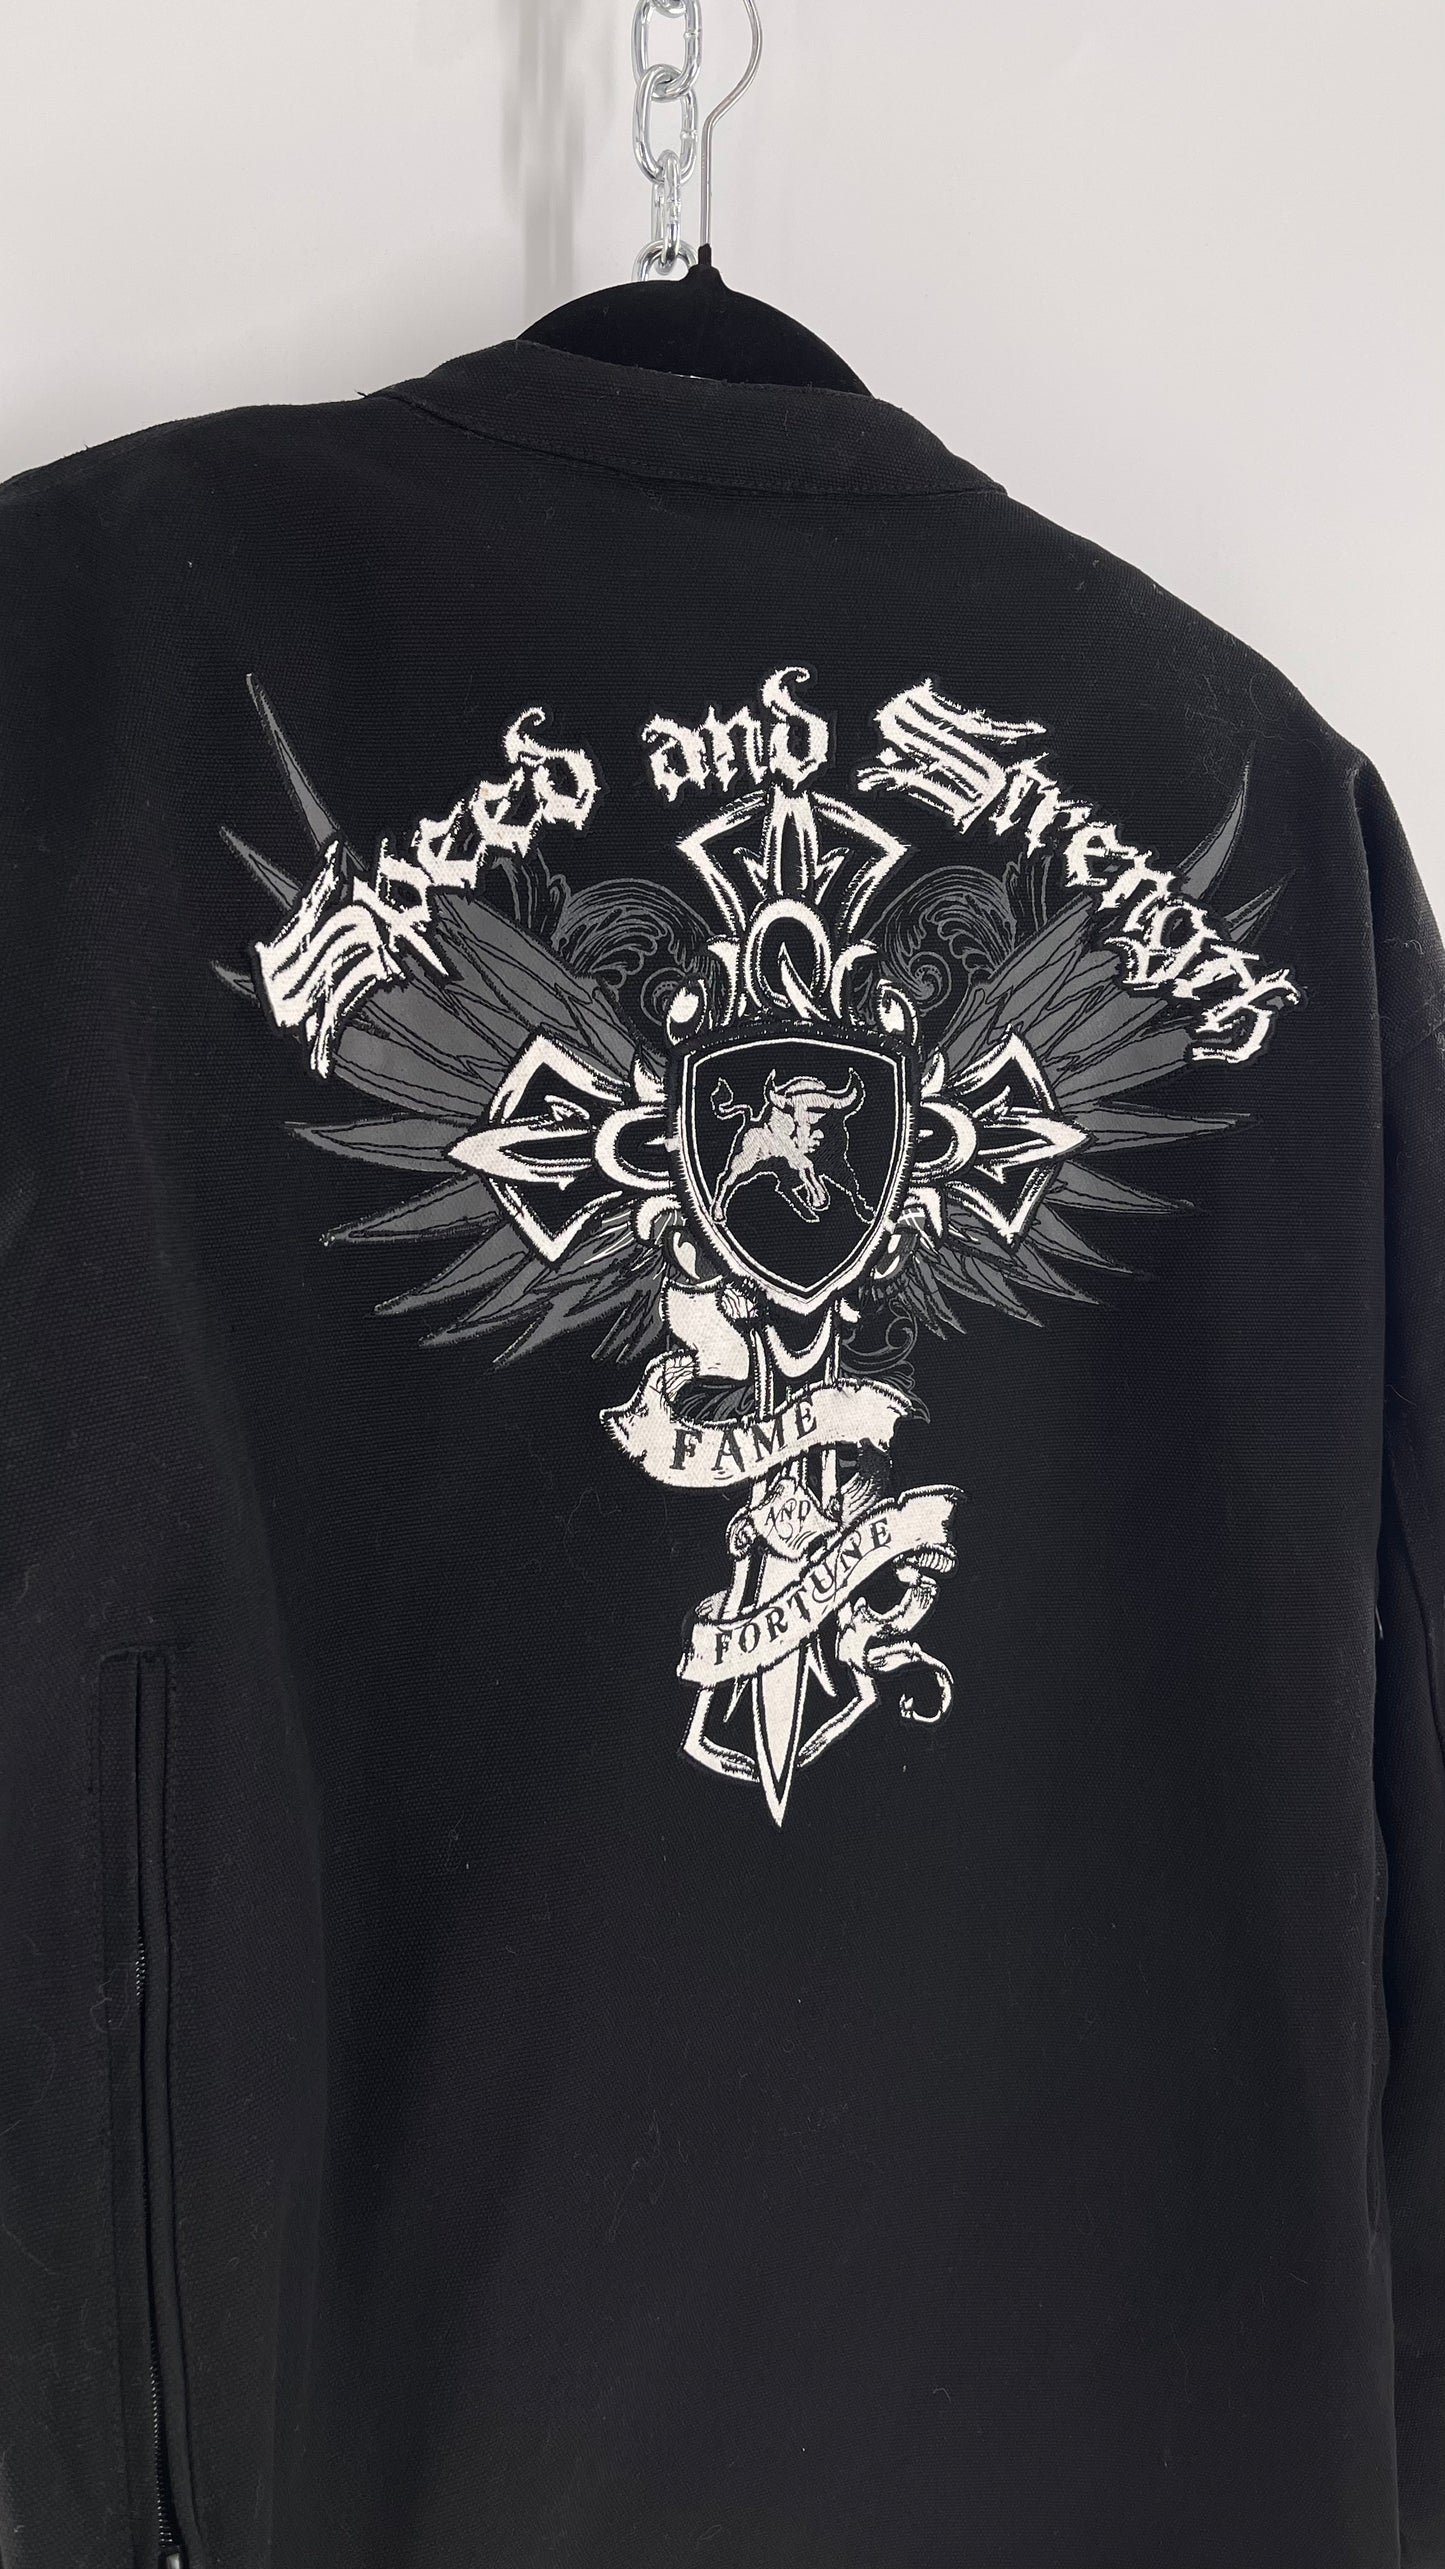 Vintage Speed + Strength Grunge Punk Riding Motorcycle Jacket with Cross Embroidery, Wings, Fame + Fortune, Speed + Strength Men’s Unisex (XXL)